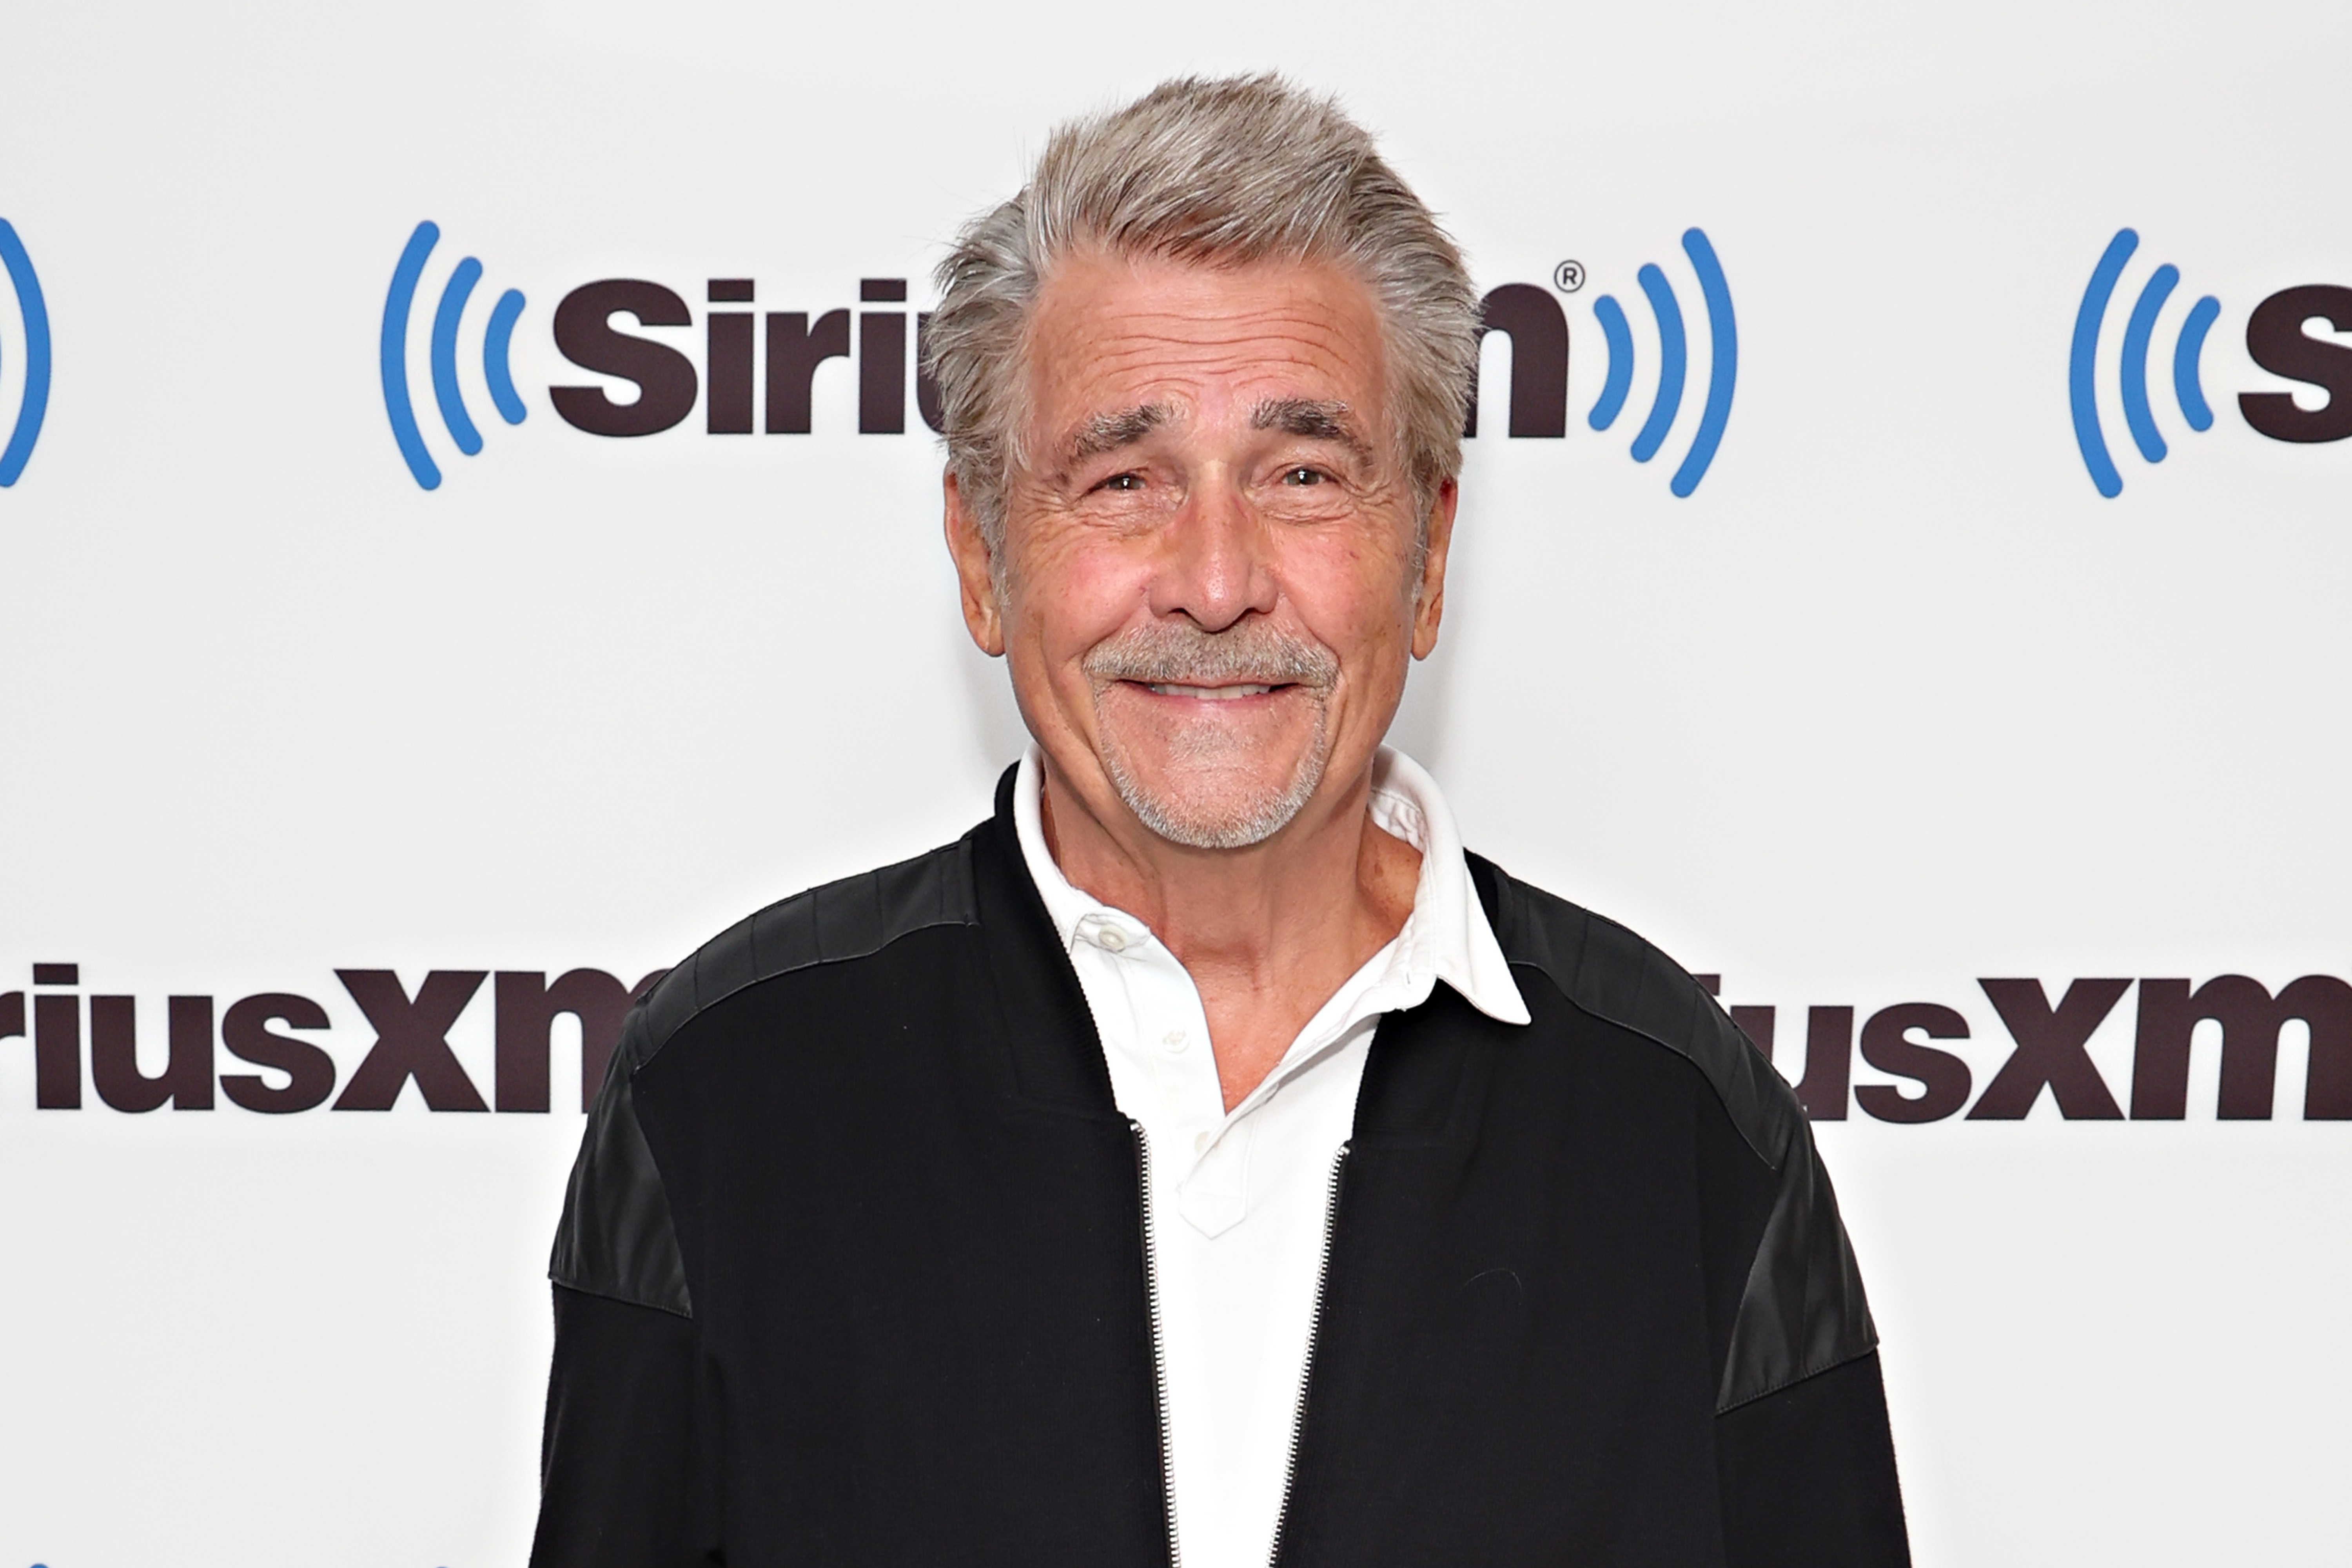 James Brolin on June 14, 2022 in New York City. | Source: Getty Images